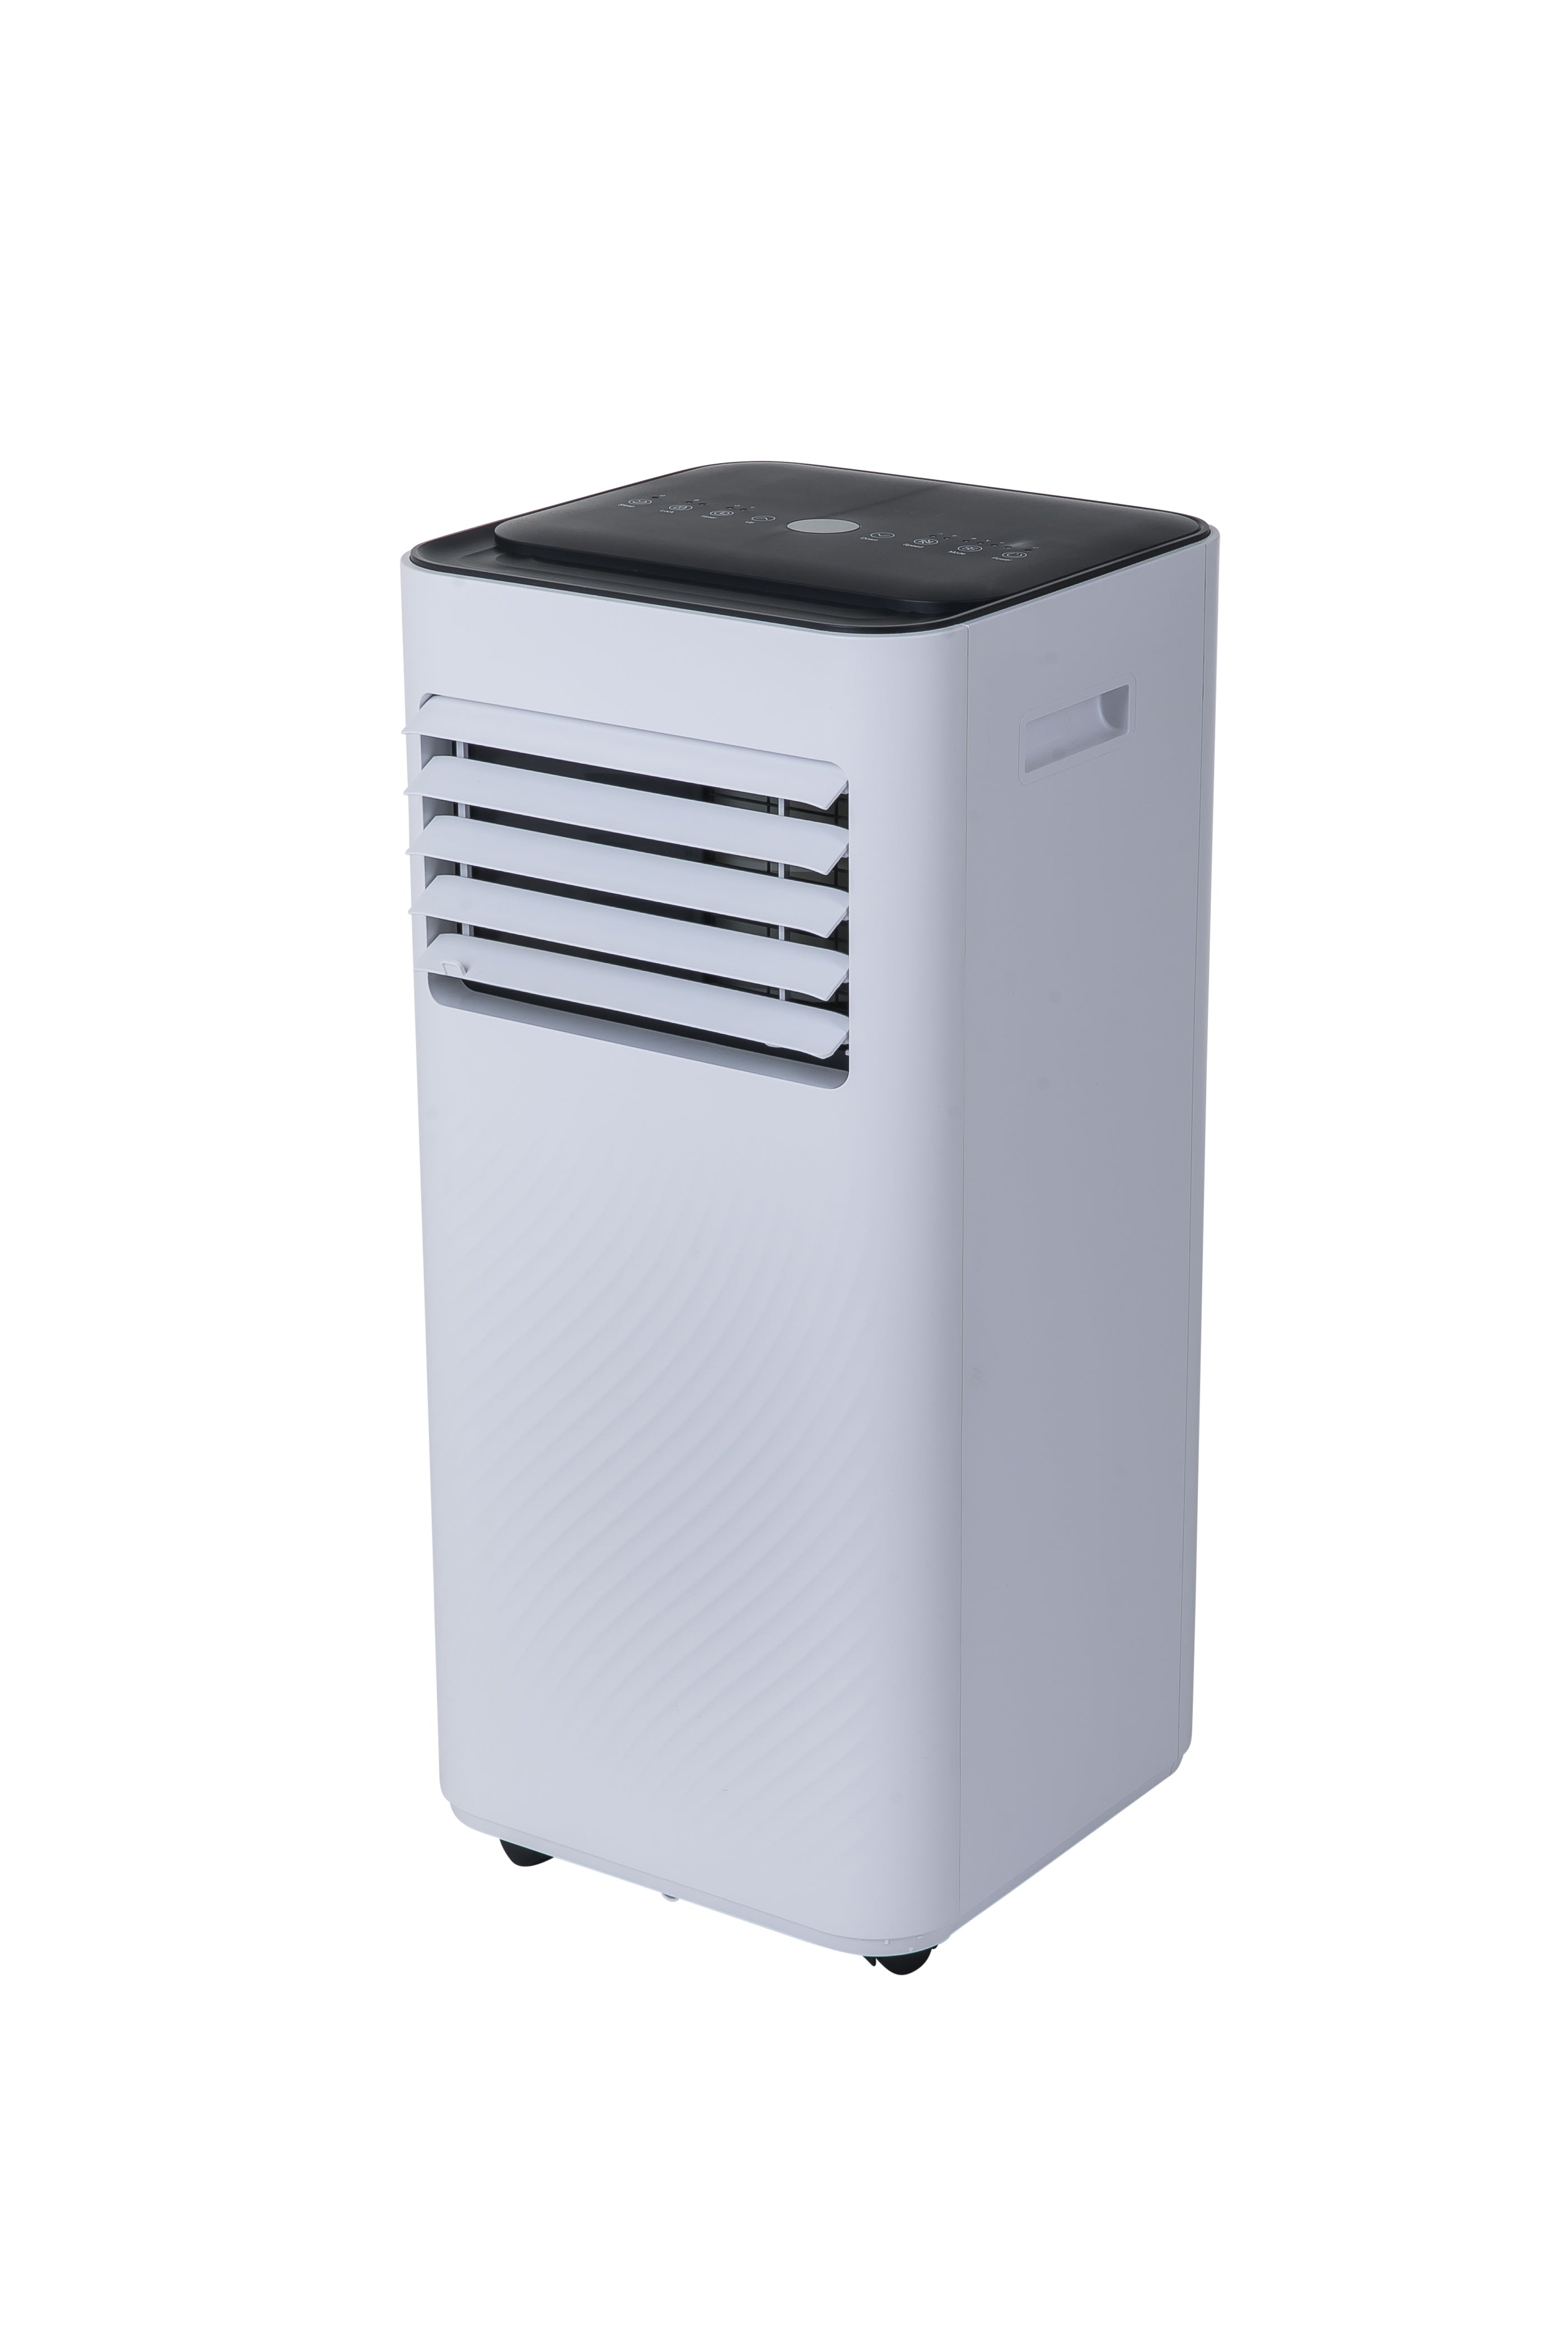 AHM Electronics Portable Air Conditioning Unit - 3 in 1 Air 